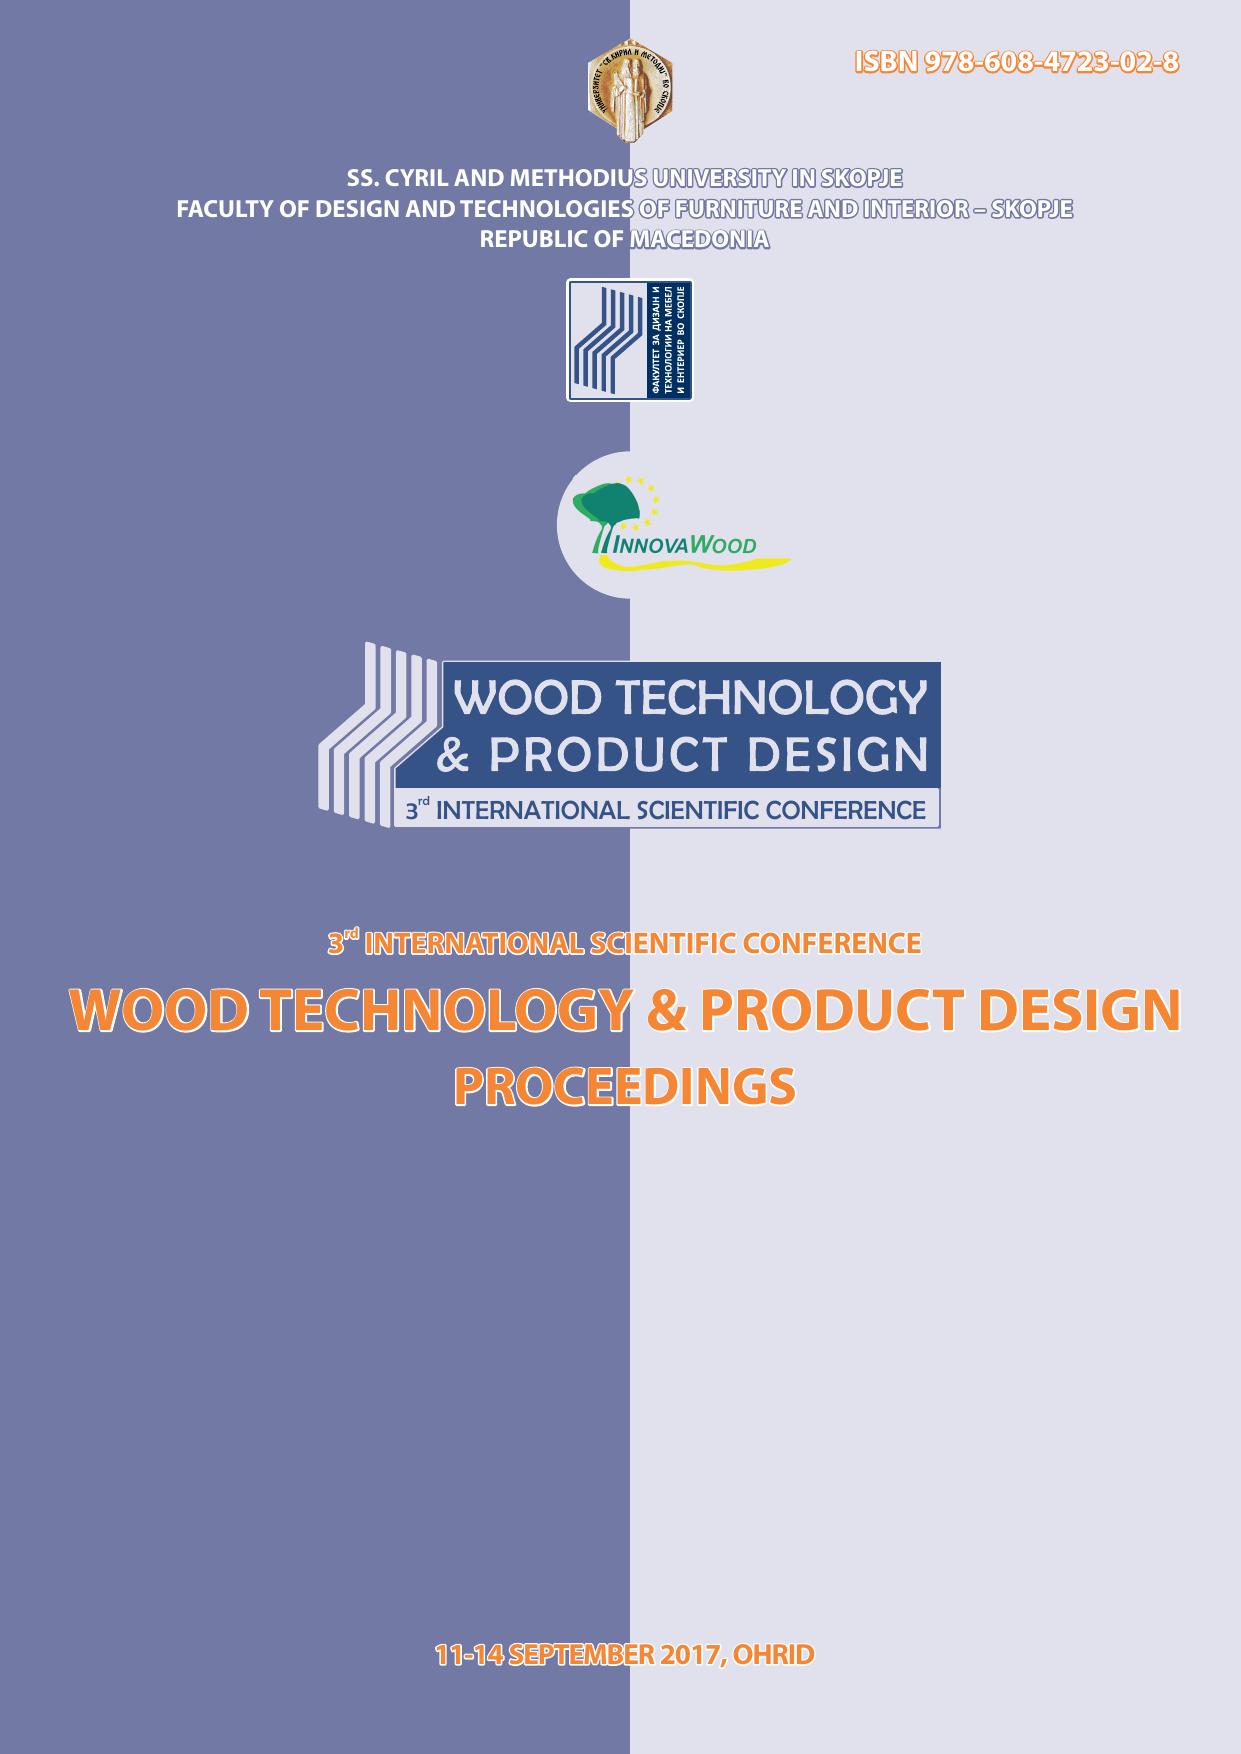 Wood Technology & Product Design 2017